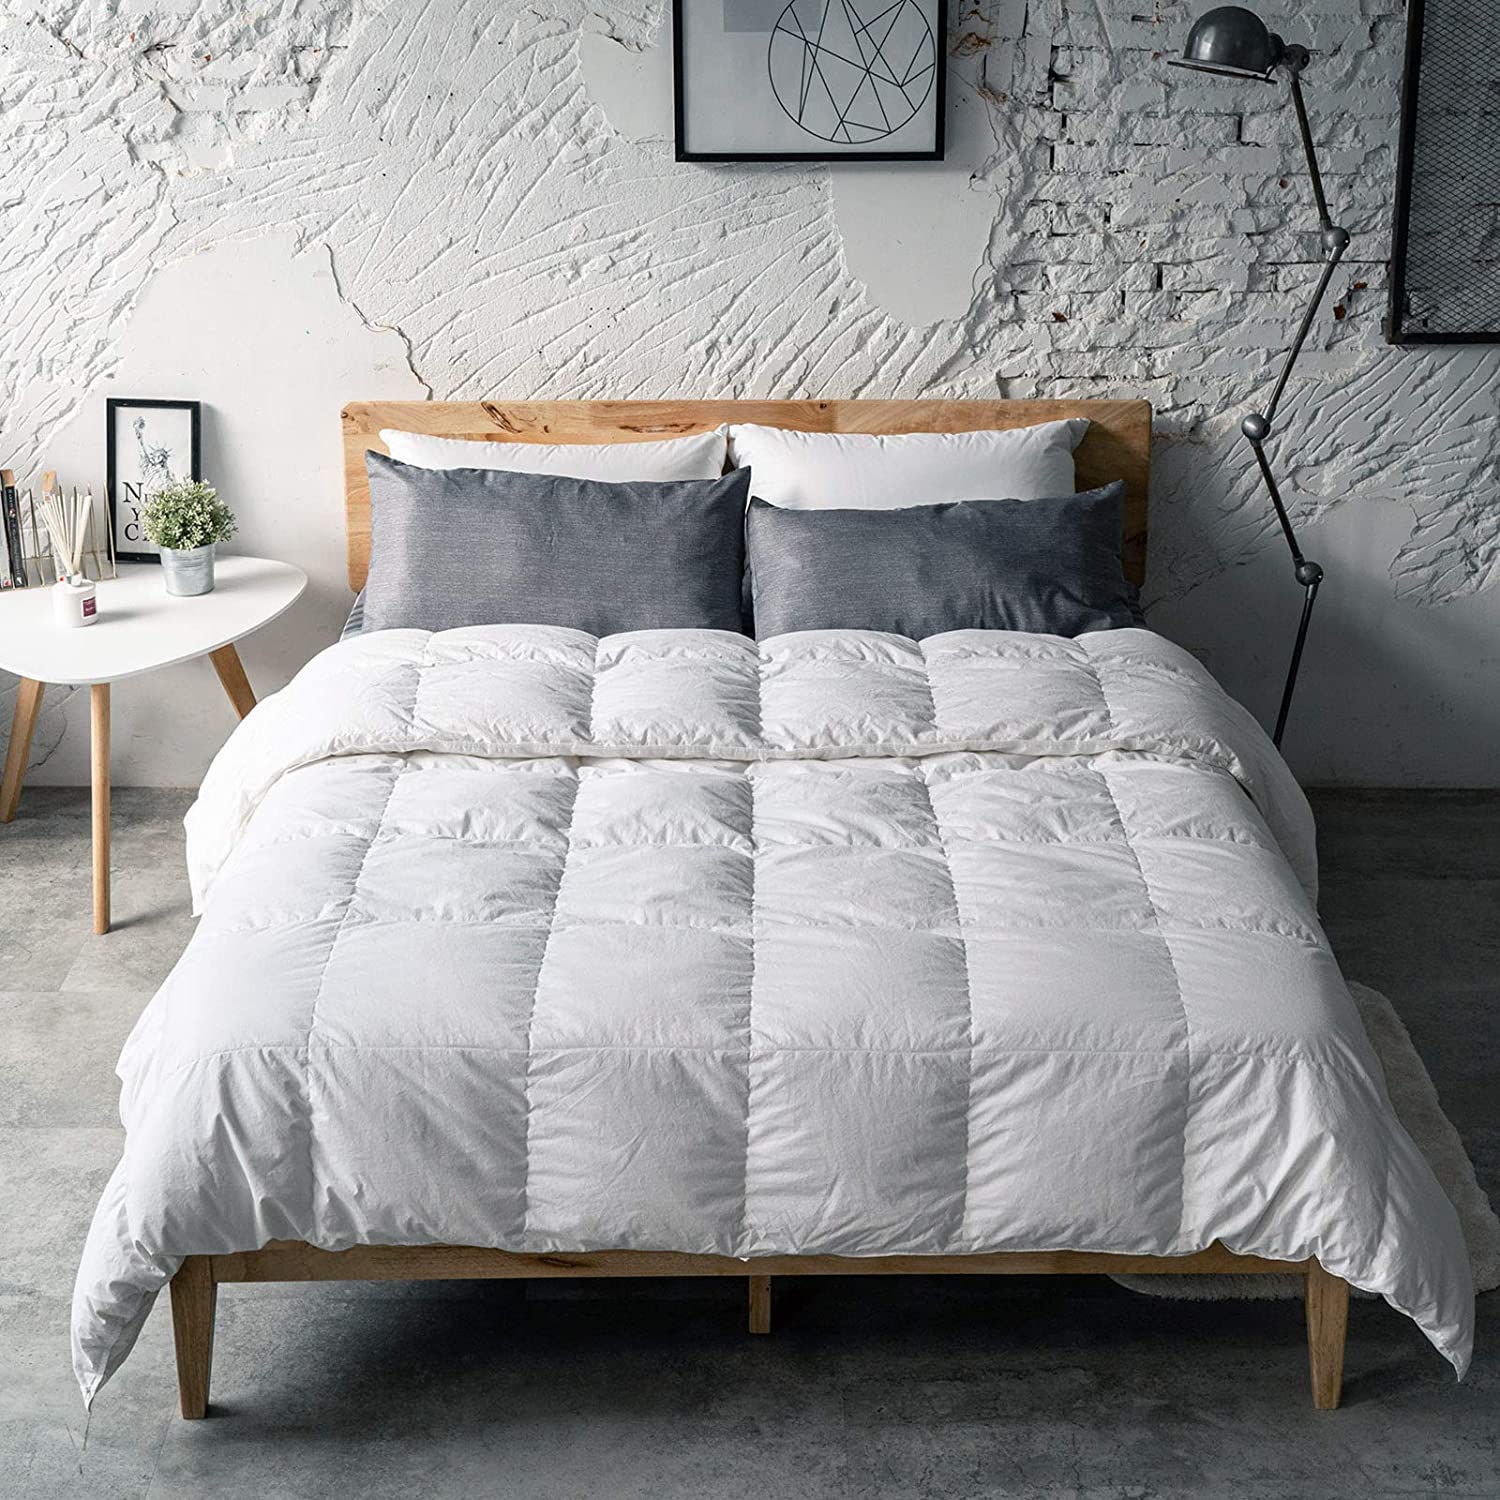 Antar Home Ethically Collected All-Season Lightweight Duvet